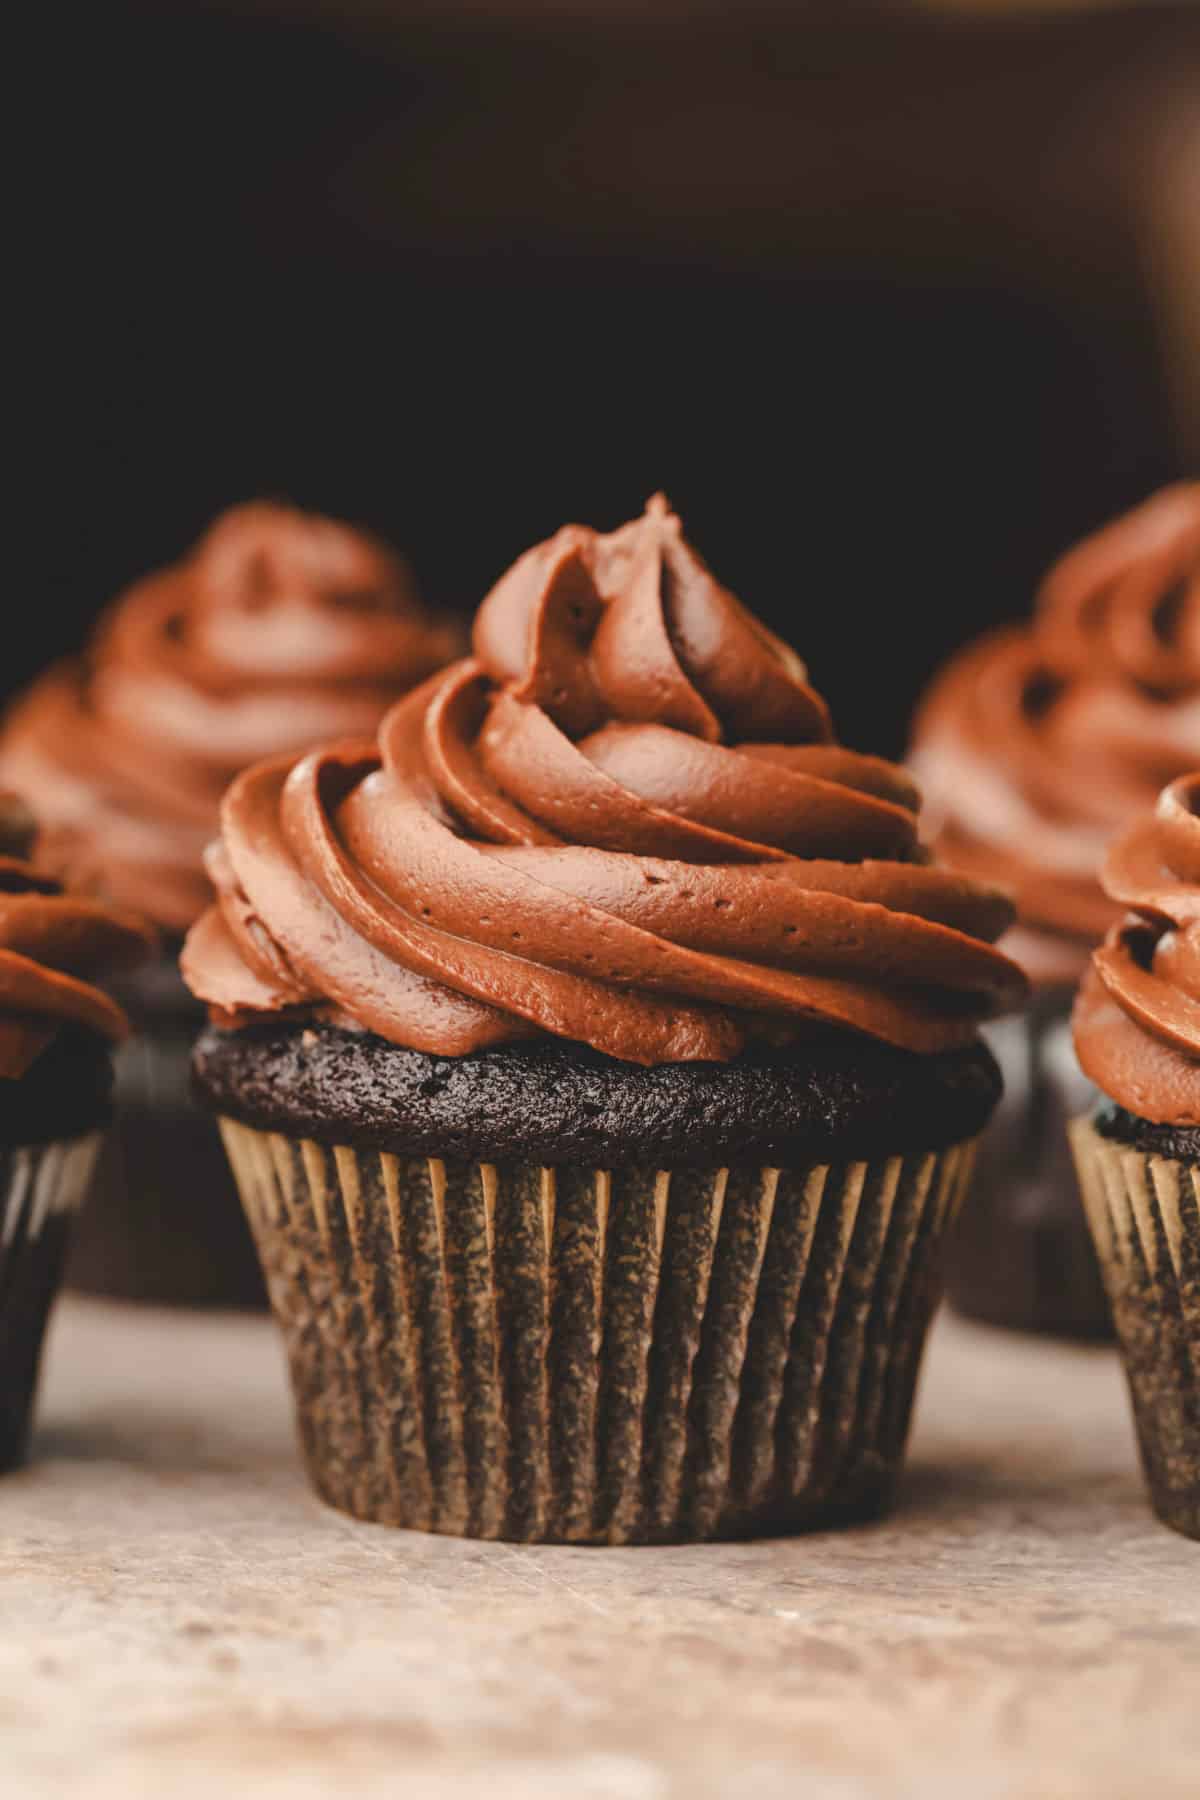 A chocolate cupcake with a swirl of chocolate frosting.